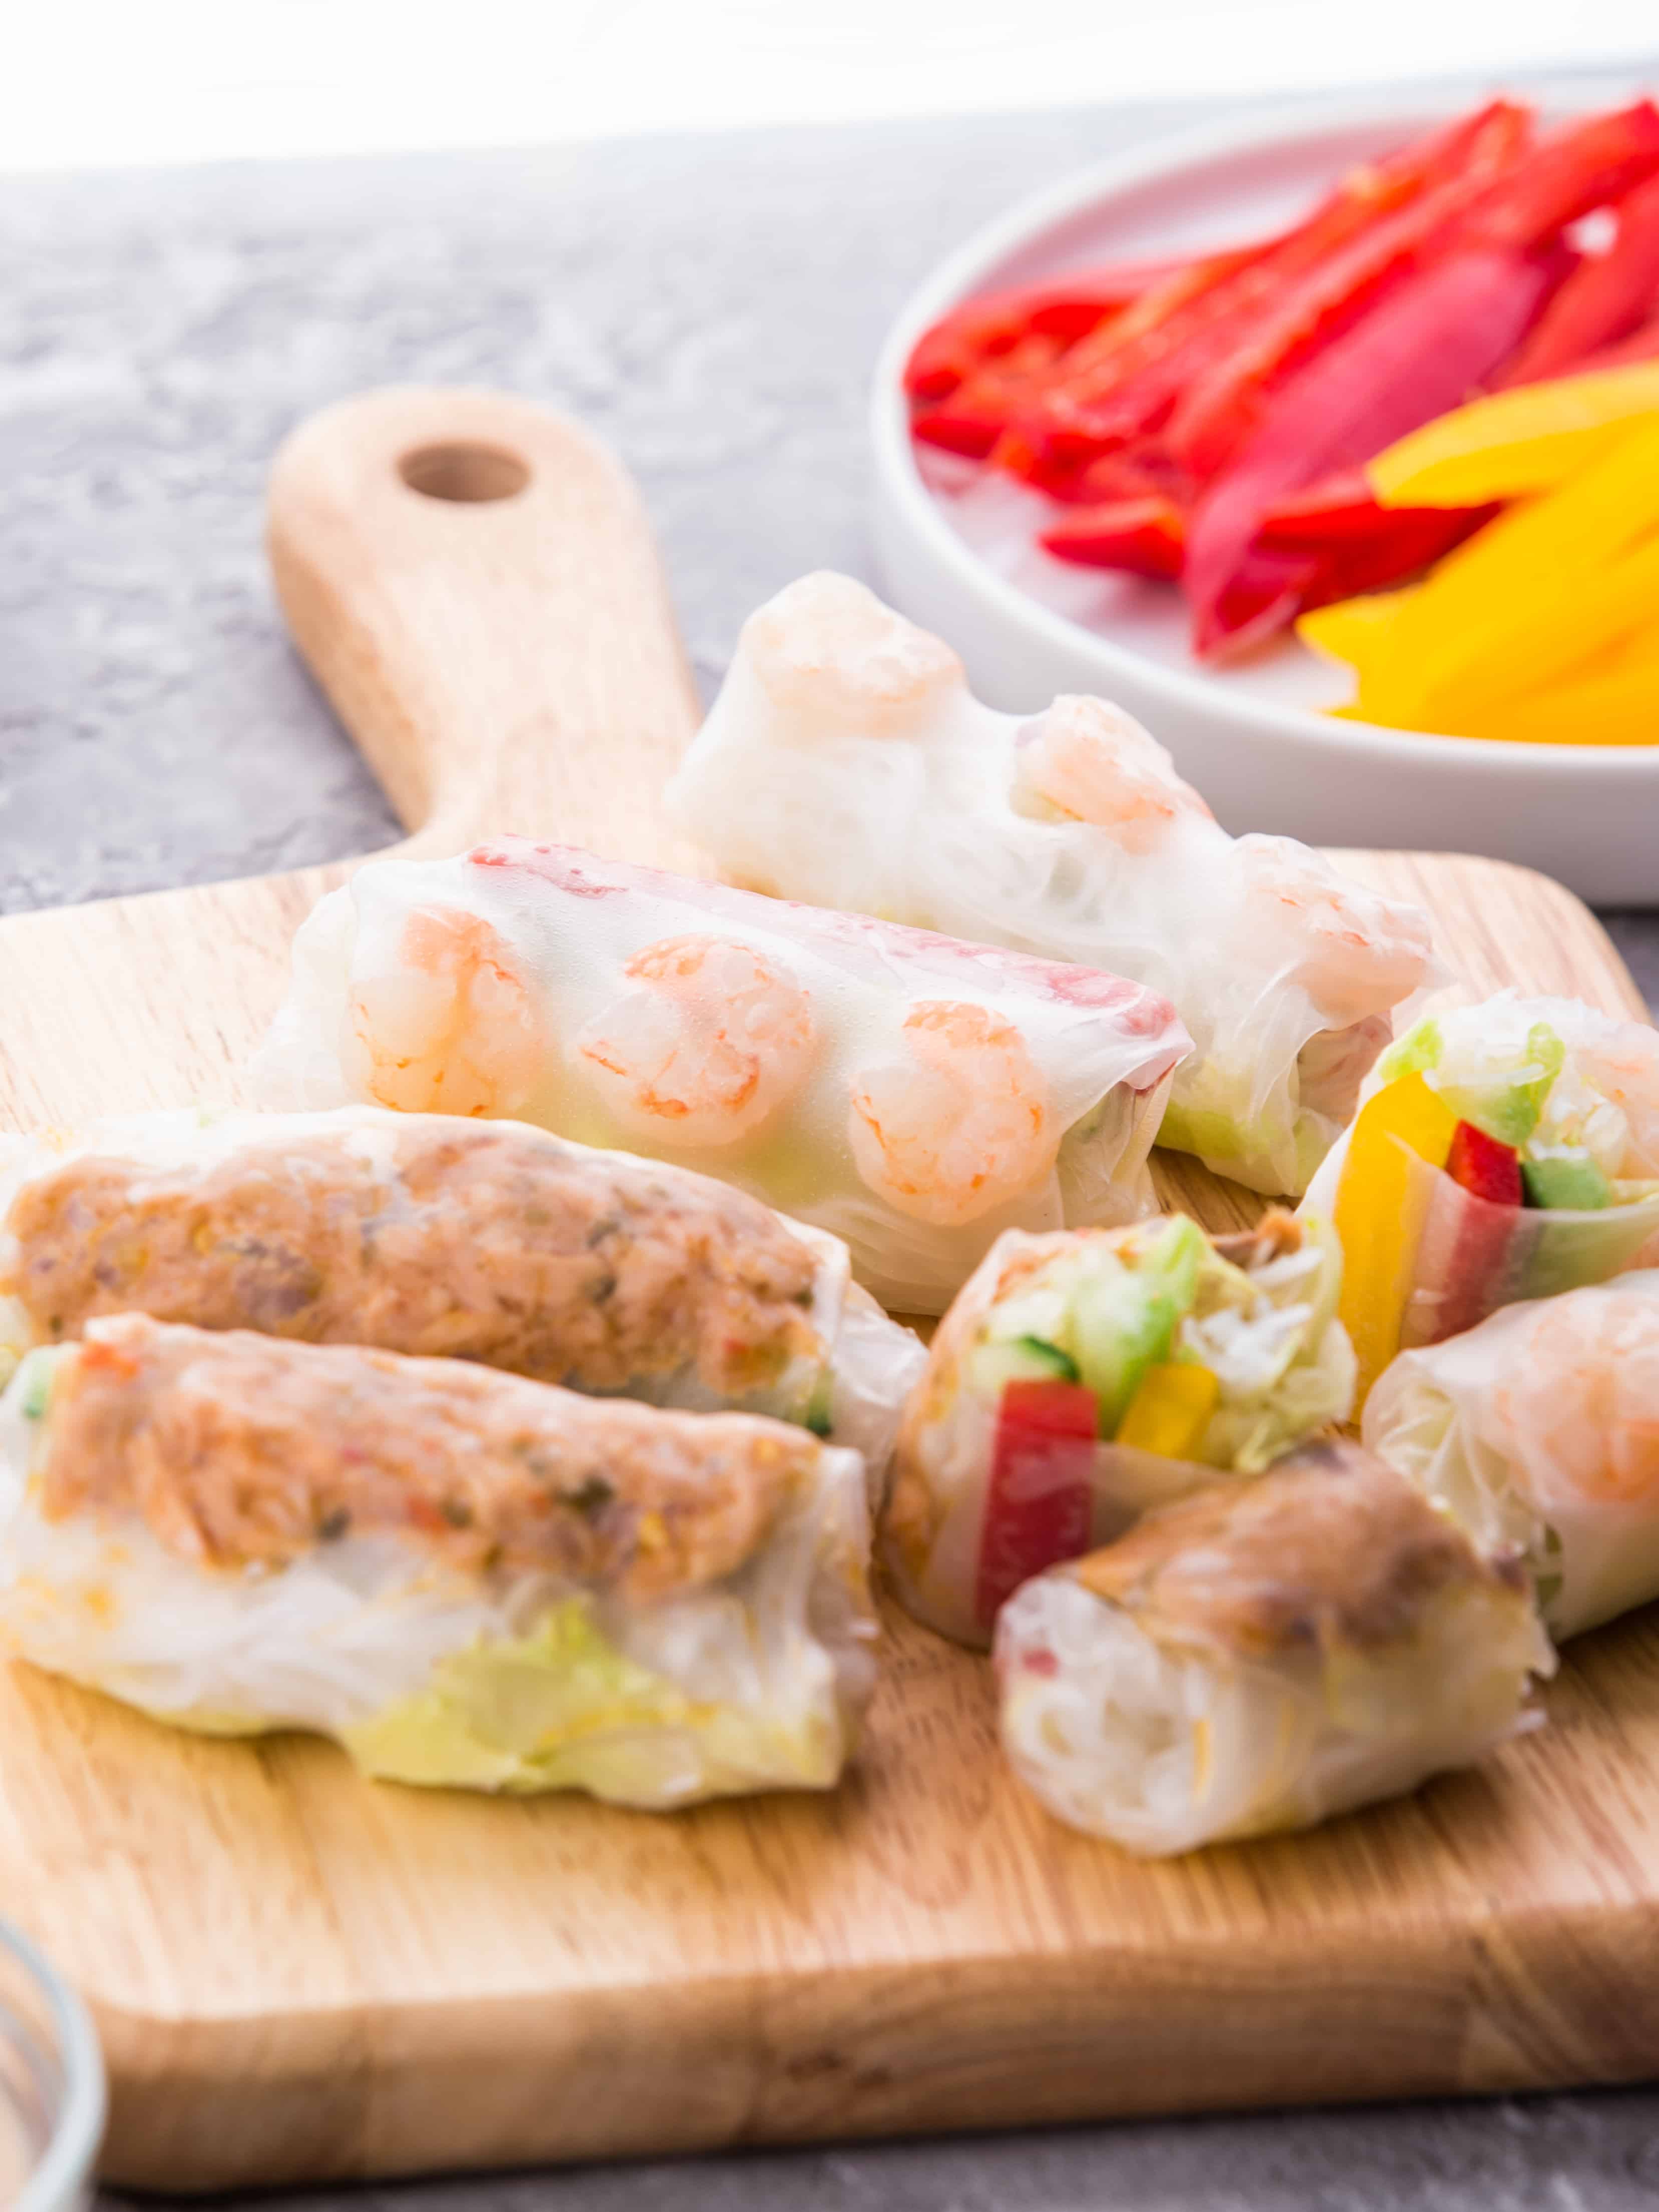 Healthy Shrimp and Spicy Tuna Vietnamese Spring Rolls! Clean and fresh appetizers served with sesame mayo and peanut sauce.